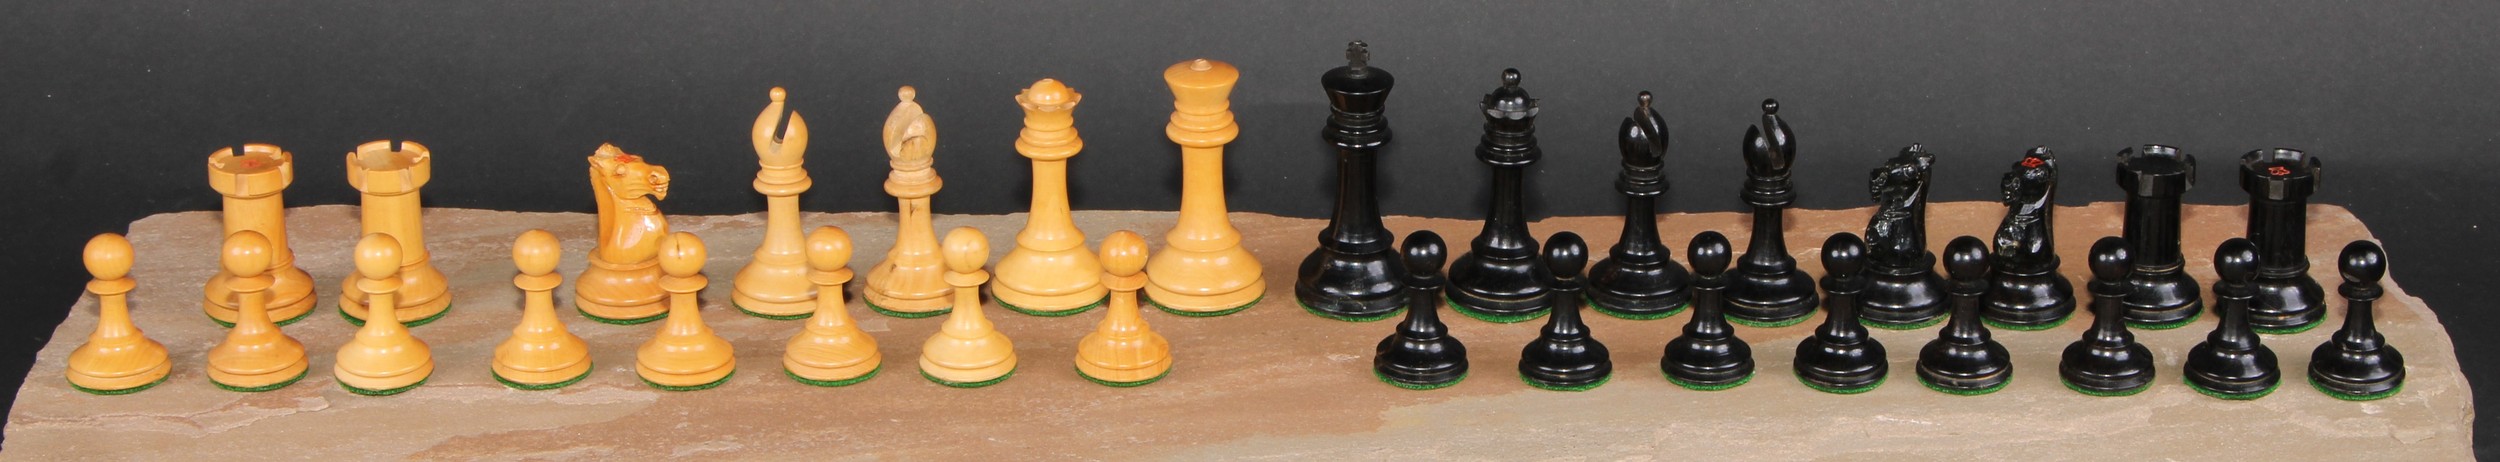 A boxwood and ebonised Staunton chess set, marked for King’s side, the Kings 7cm high, mahogany box - Image 2 of 4